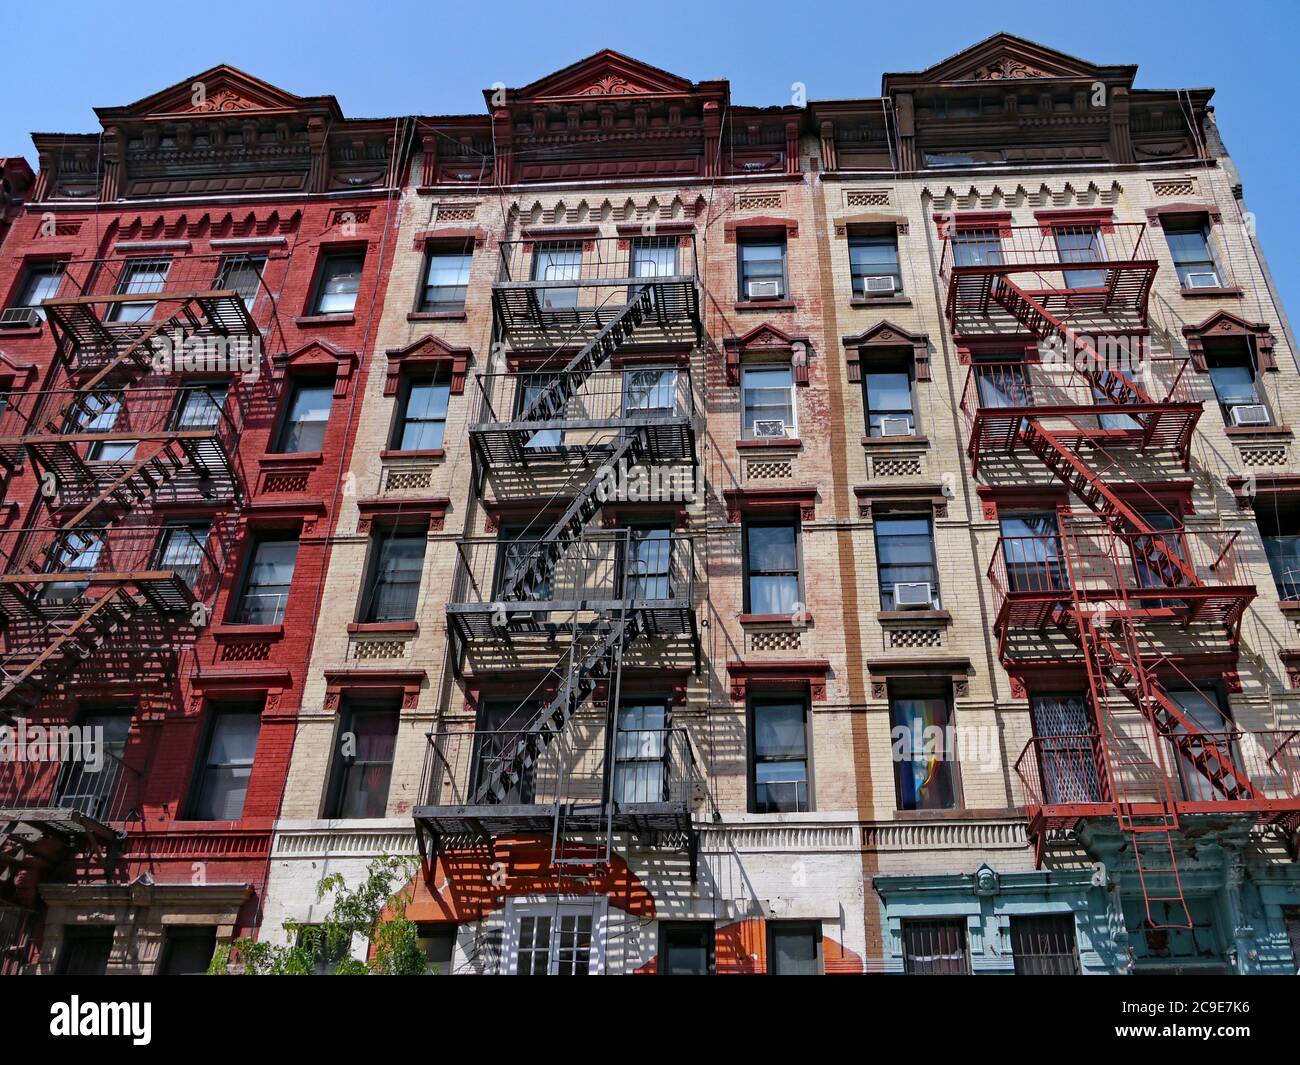 New York City, colorful old fashioned apartment buildings with external fire ladders Stock Photo